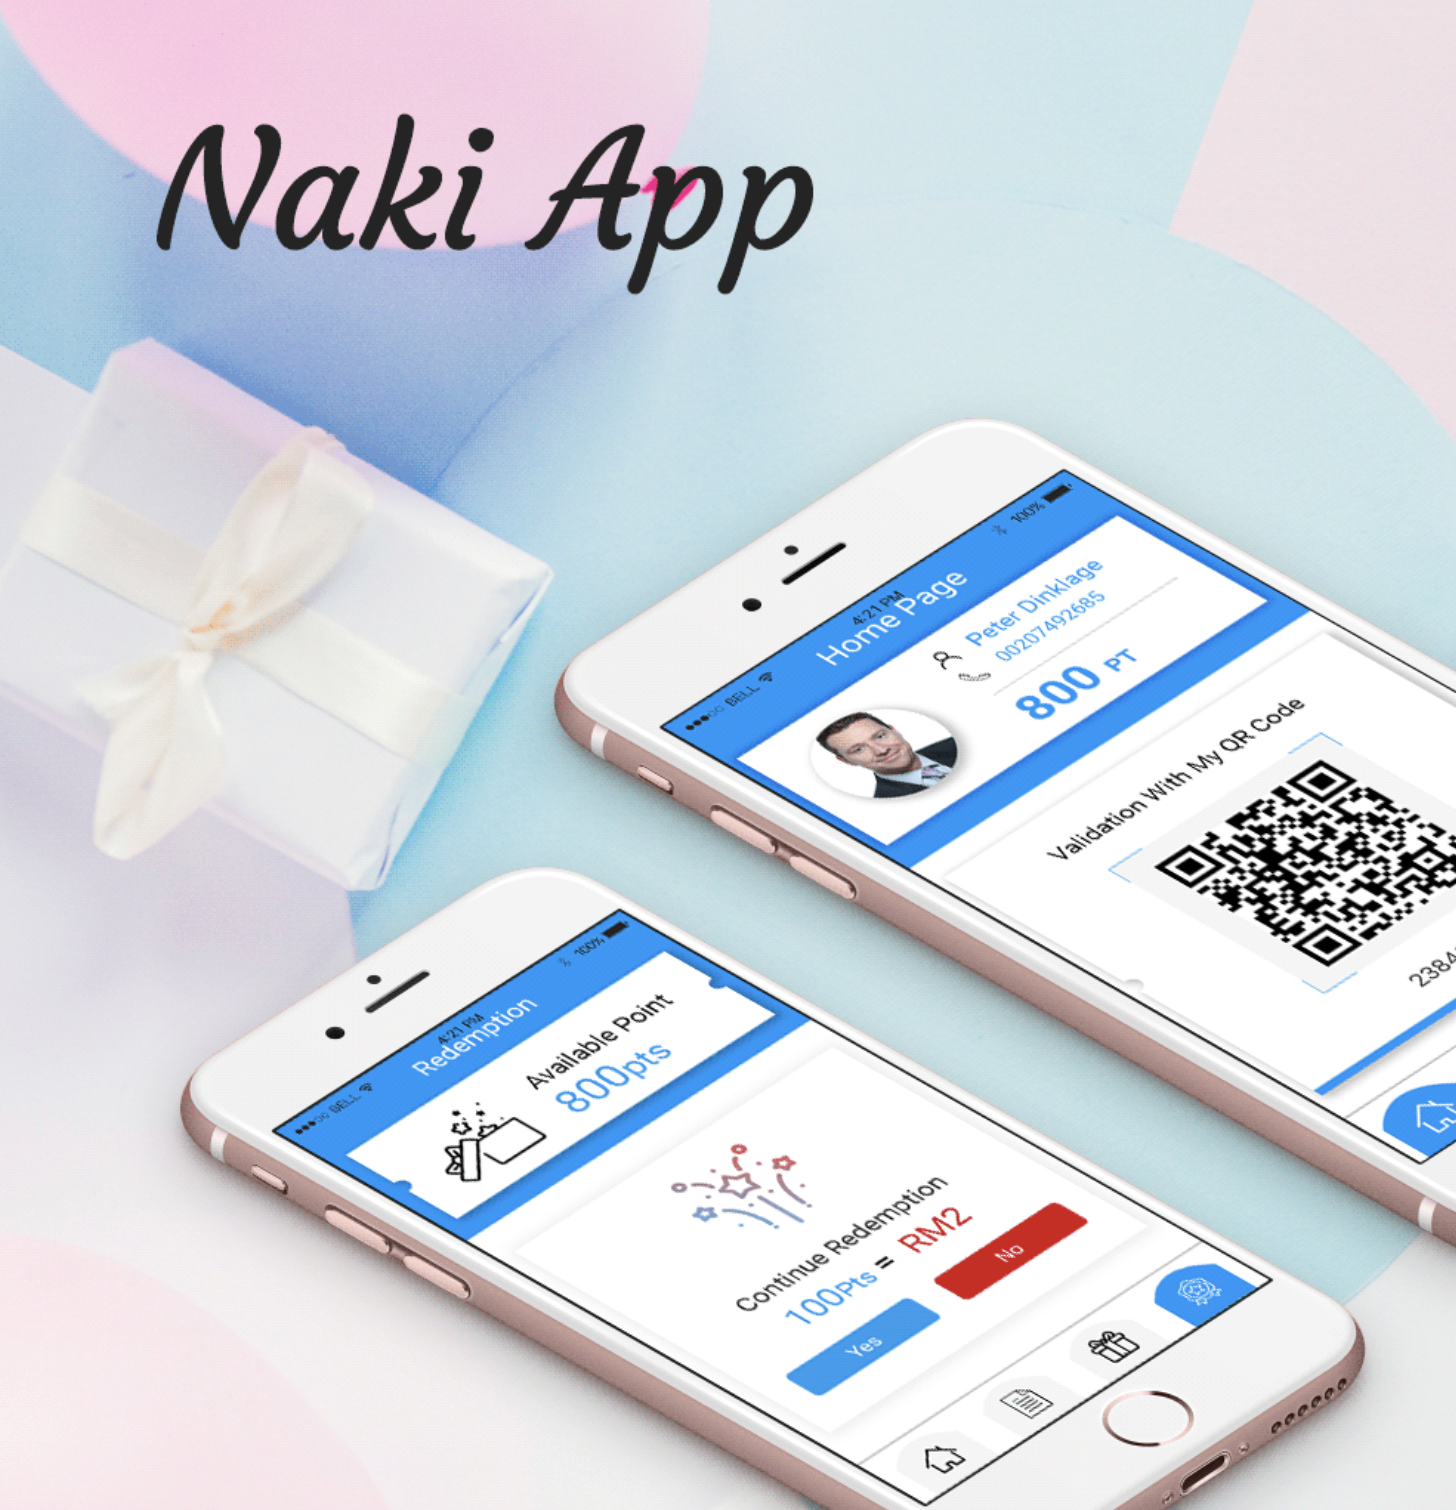 Naki app will give certain points to theclient in return after buying some goods